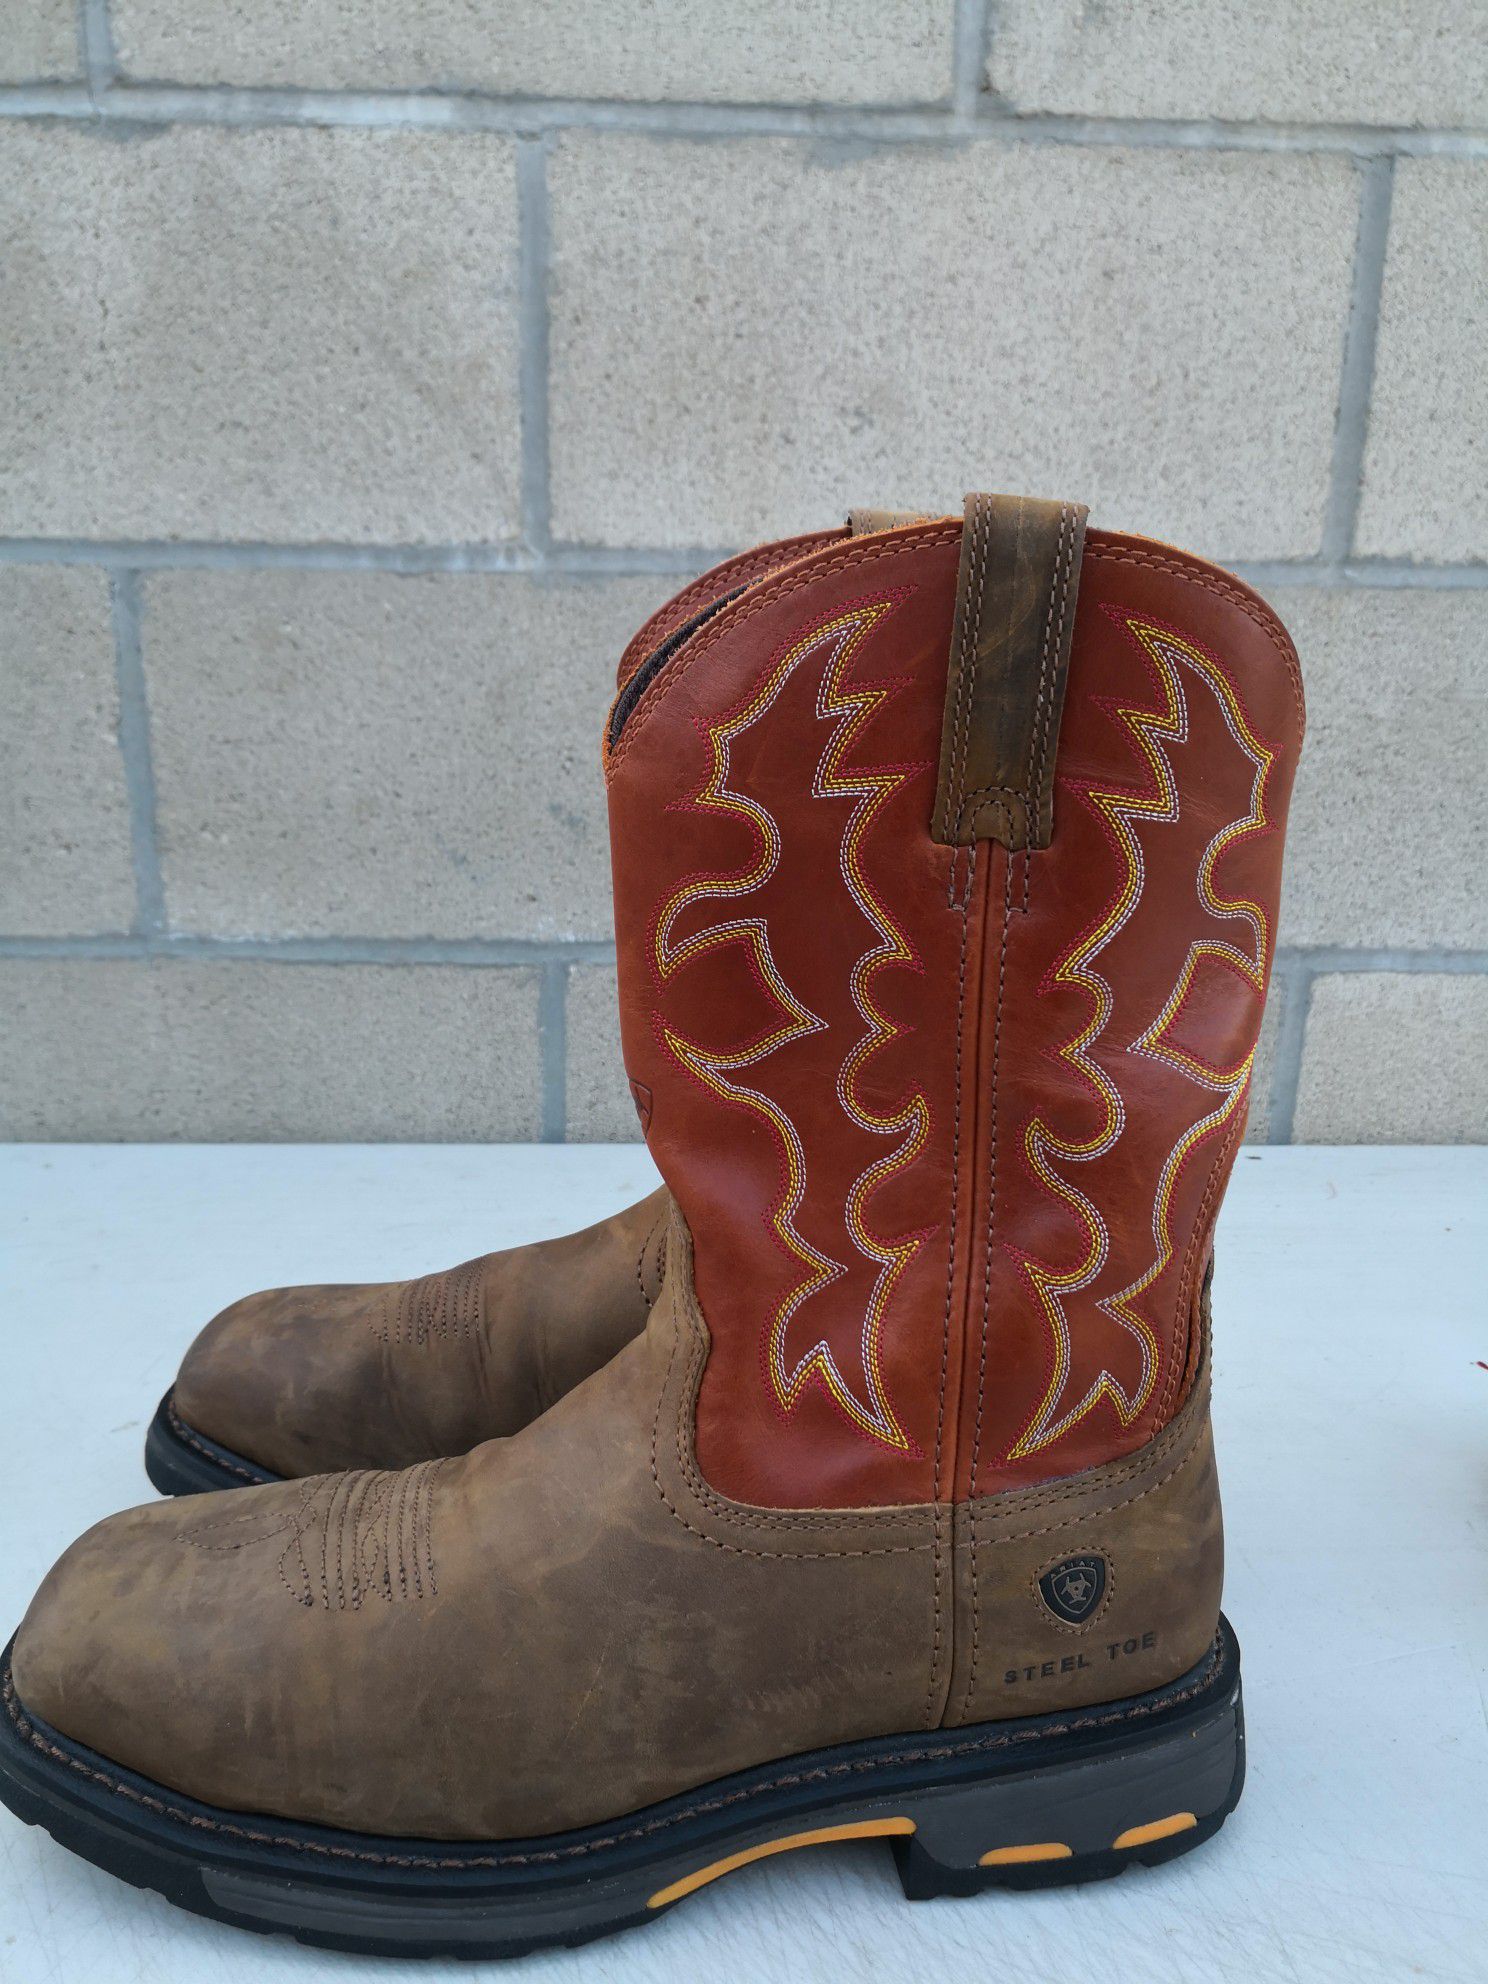 Ariat steel toe work boots size 10D